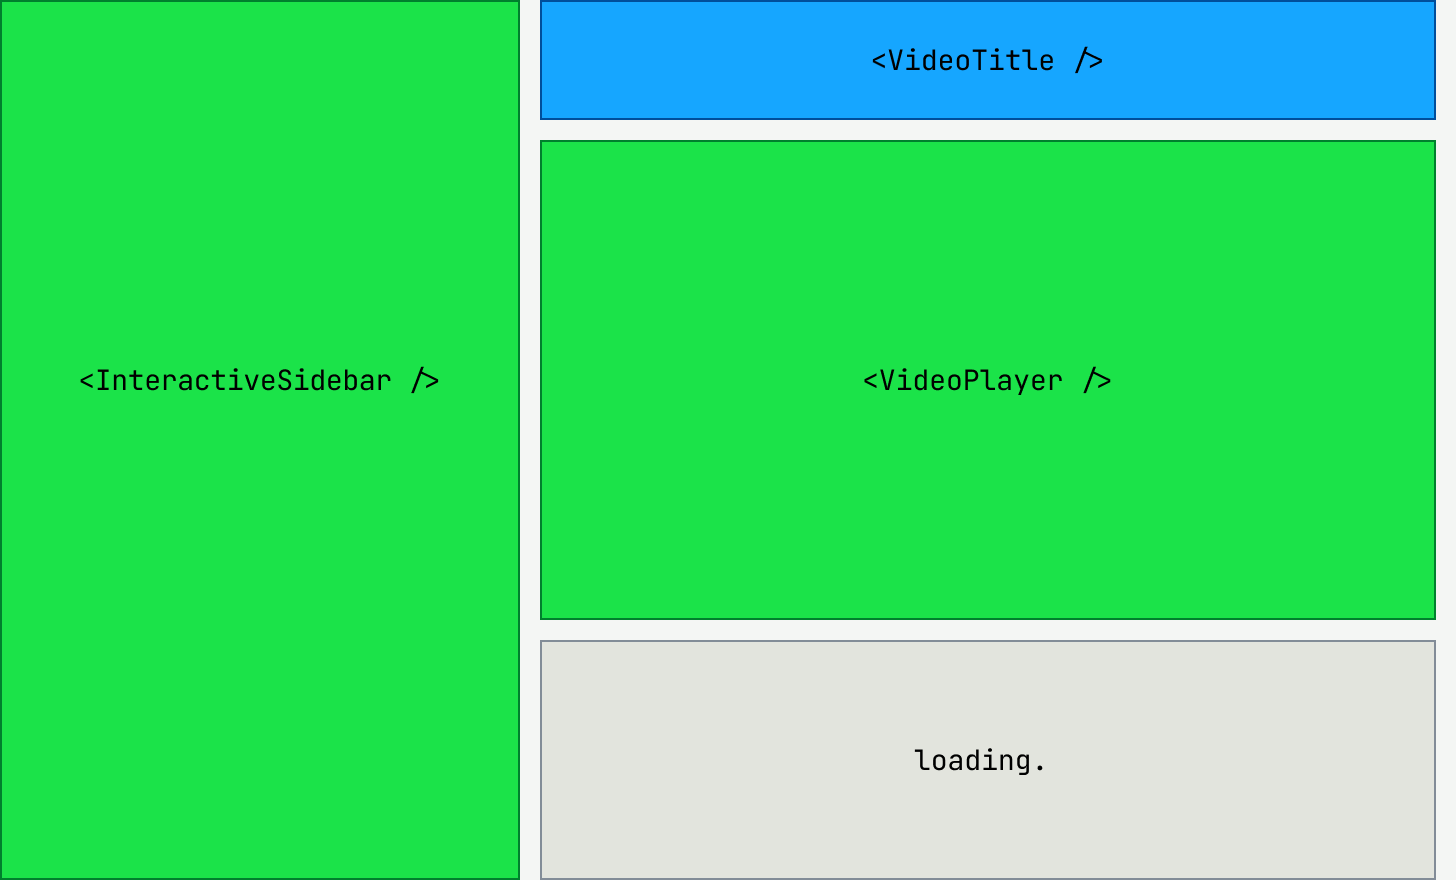 A blue component (labeled SlowComponent) pops in after loading for a short time